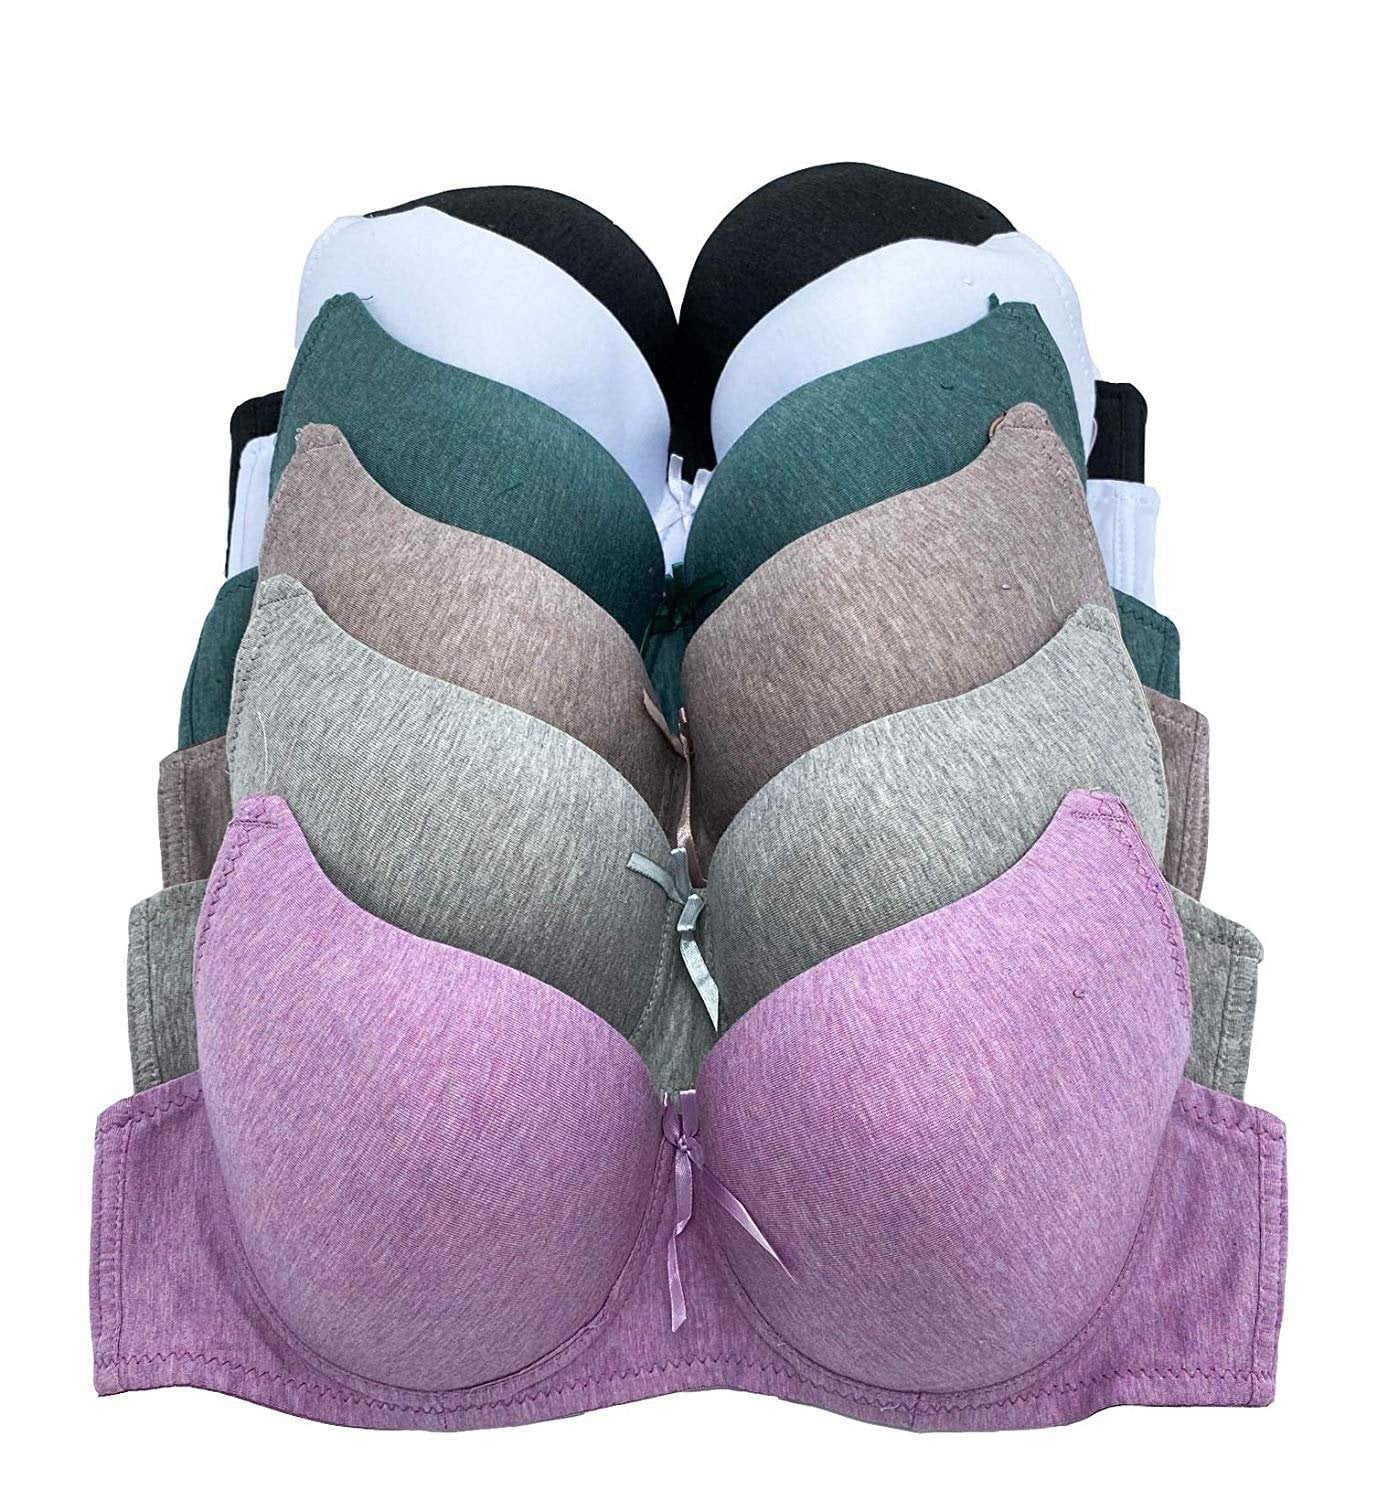 Women Bras 6 Pack of Bra B cup C cup D cup DD cup Size 36D (C8208